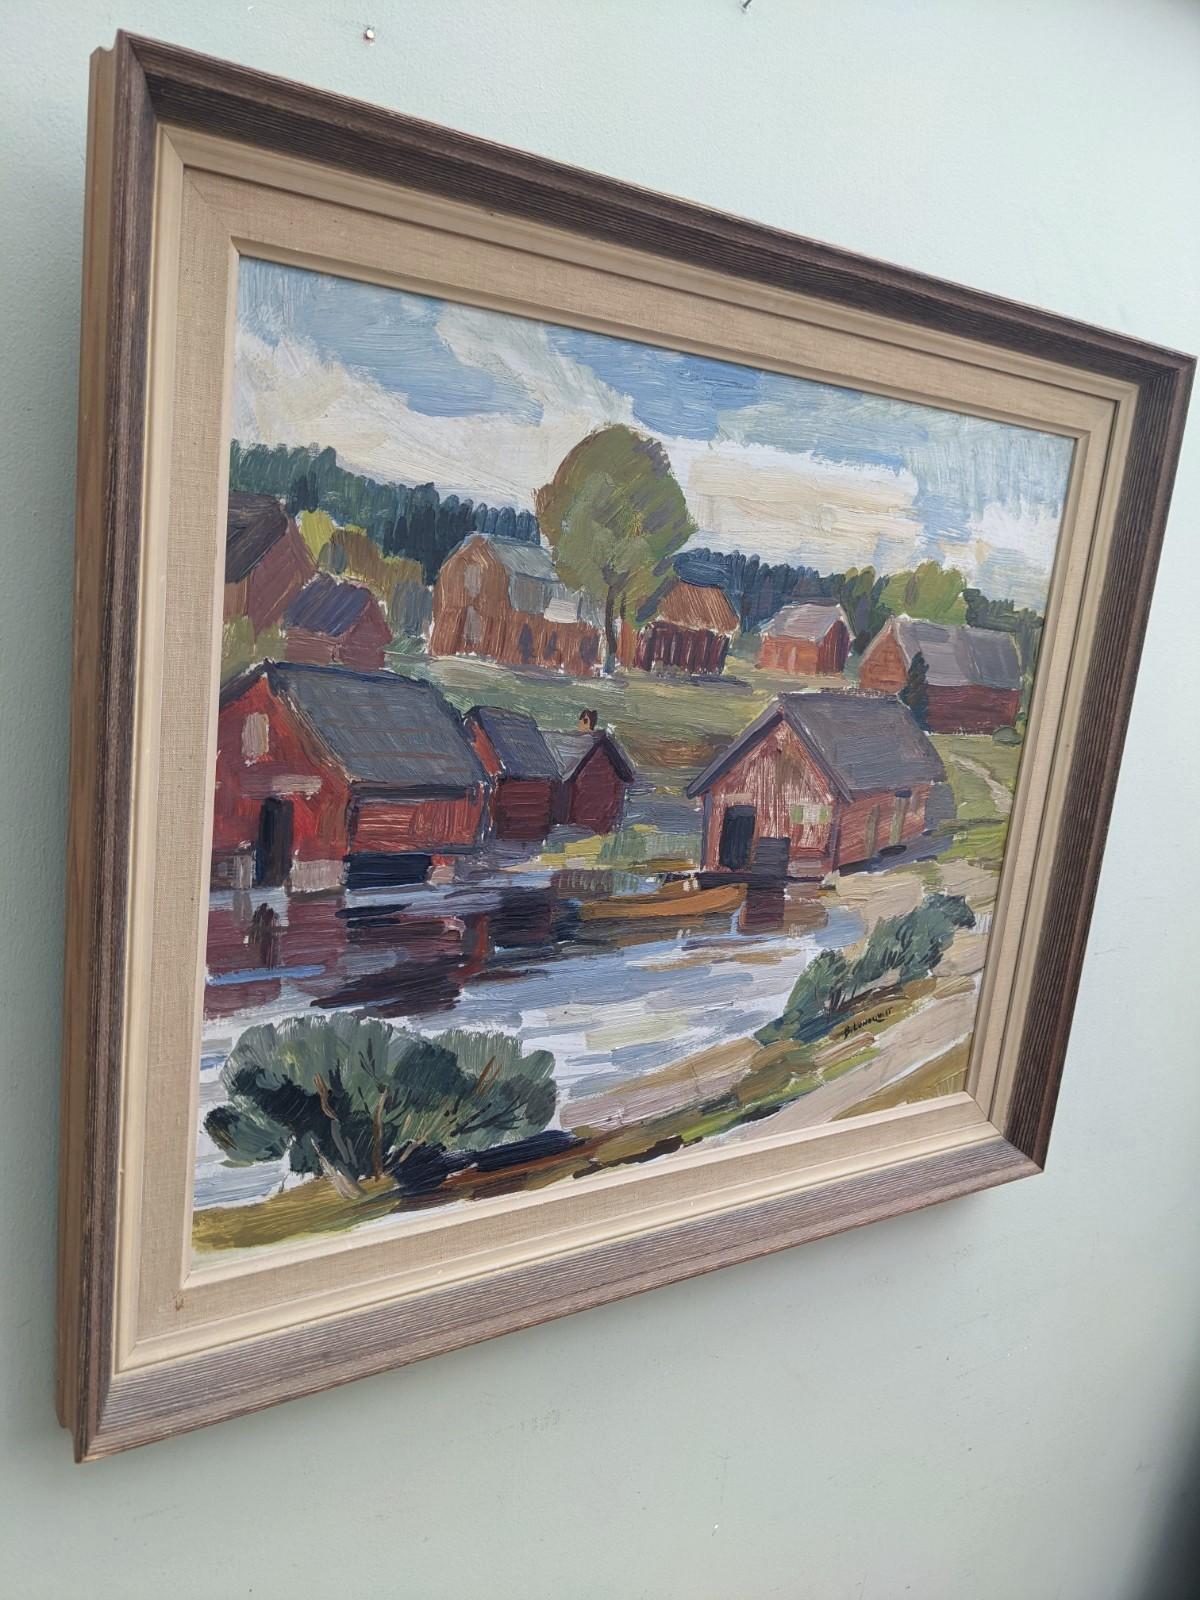 LAKE HOUSES 
Size: 55 x 65 cm (including frame)
Oil on board

A lively and scenic modernist landscape composition, executed in oil onto board.

The composition presents a picturesque view of houses by a lake, set amidst lush greenery.

The artist